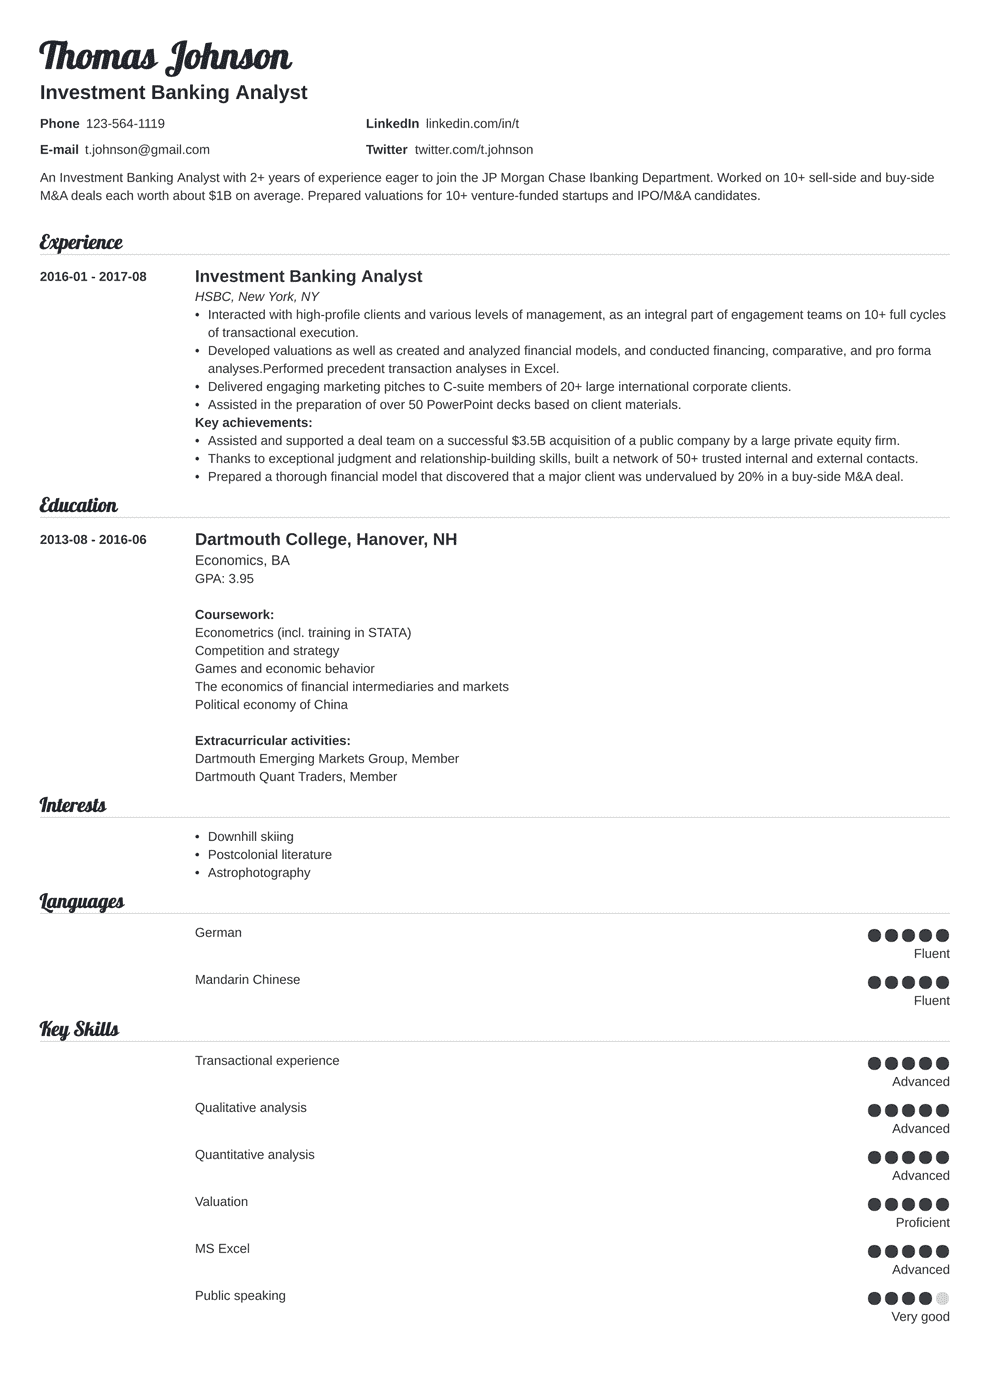 Investment Banking Resume Template & Guide for 2023